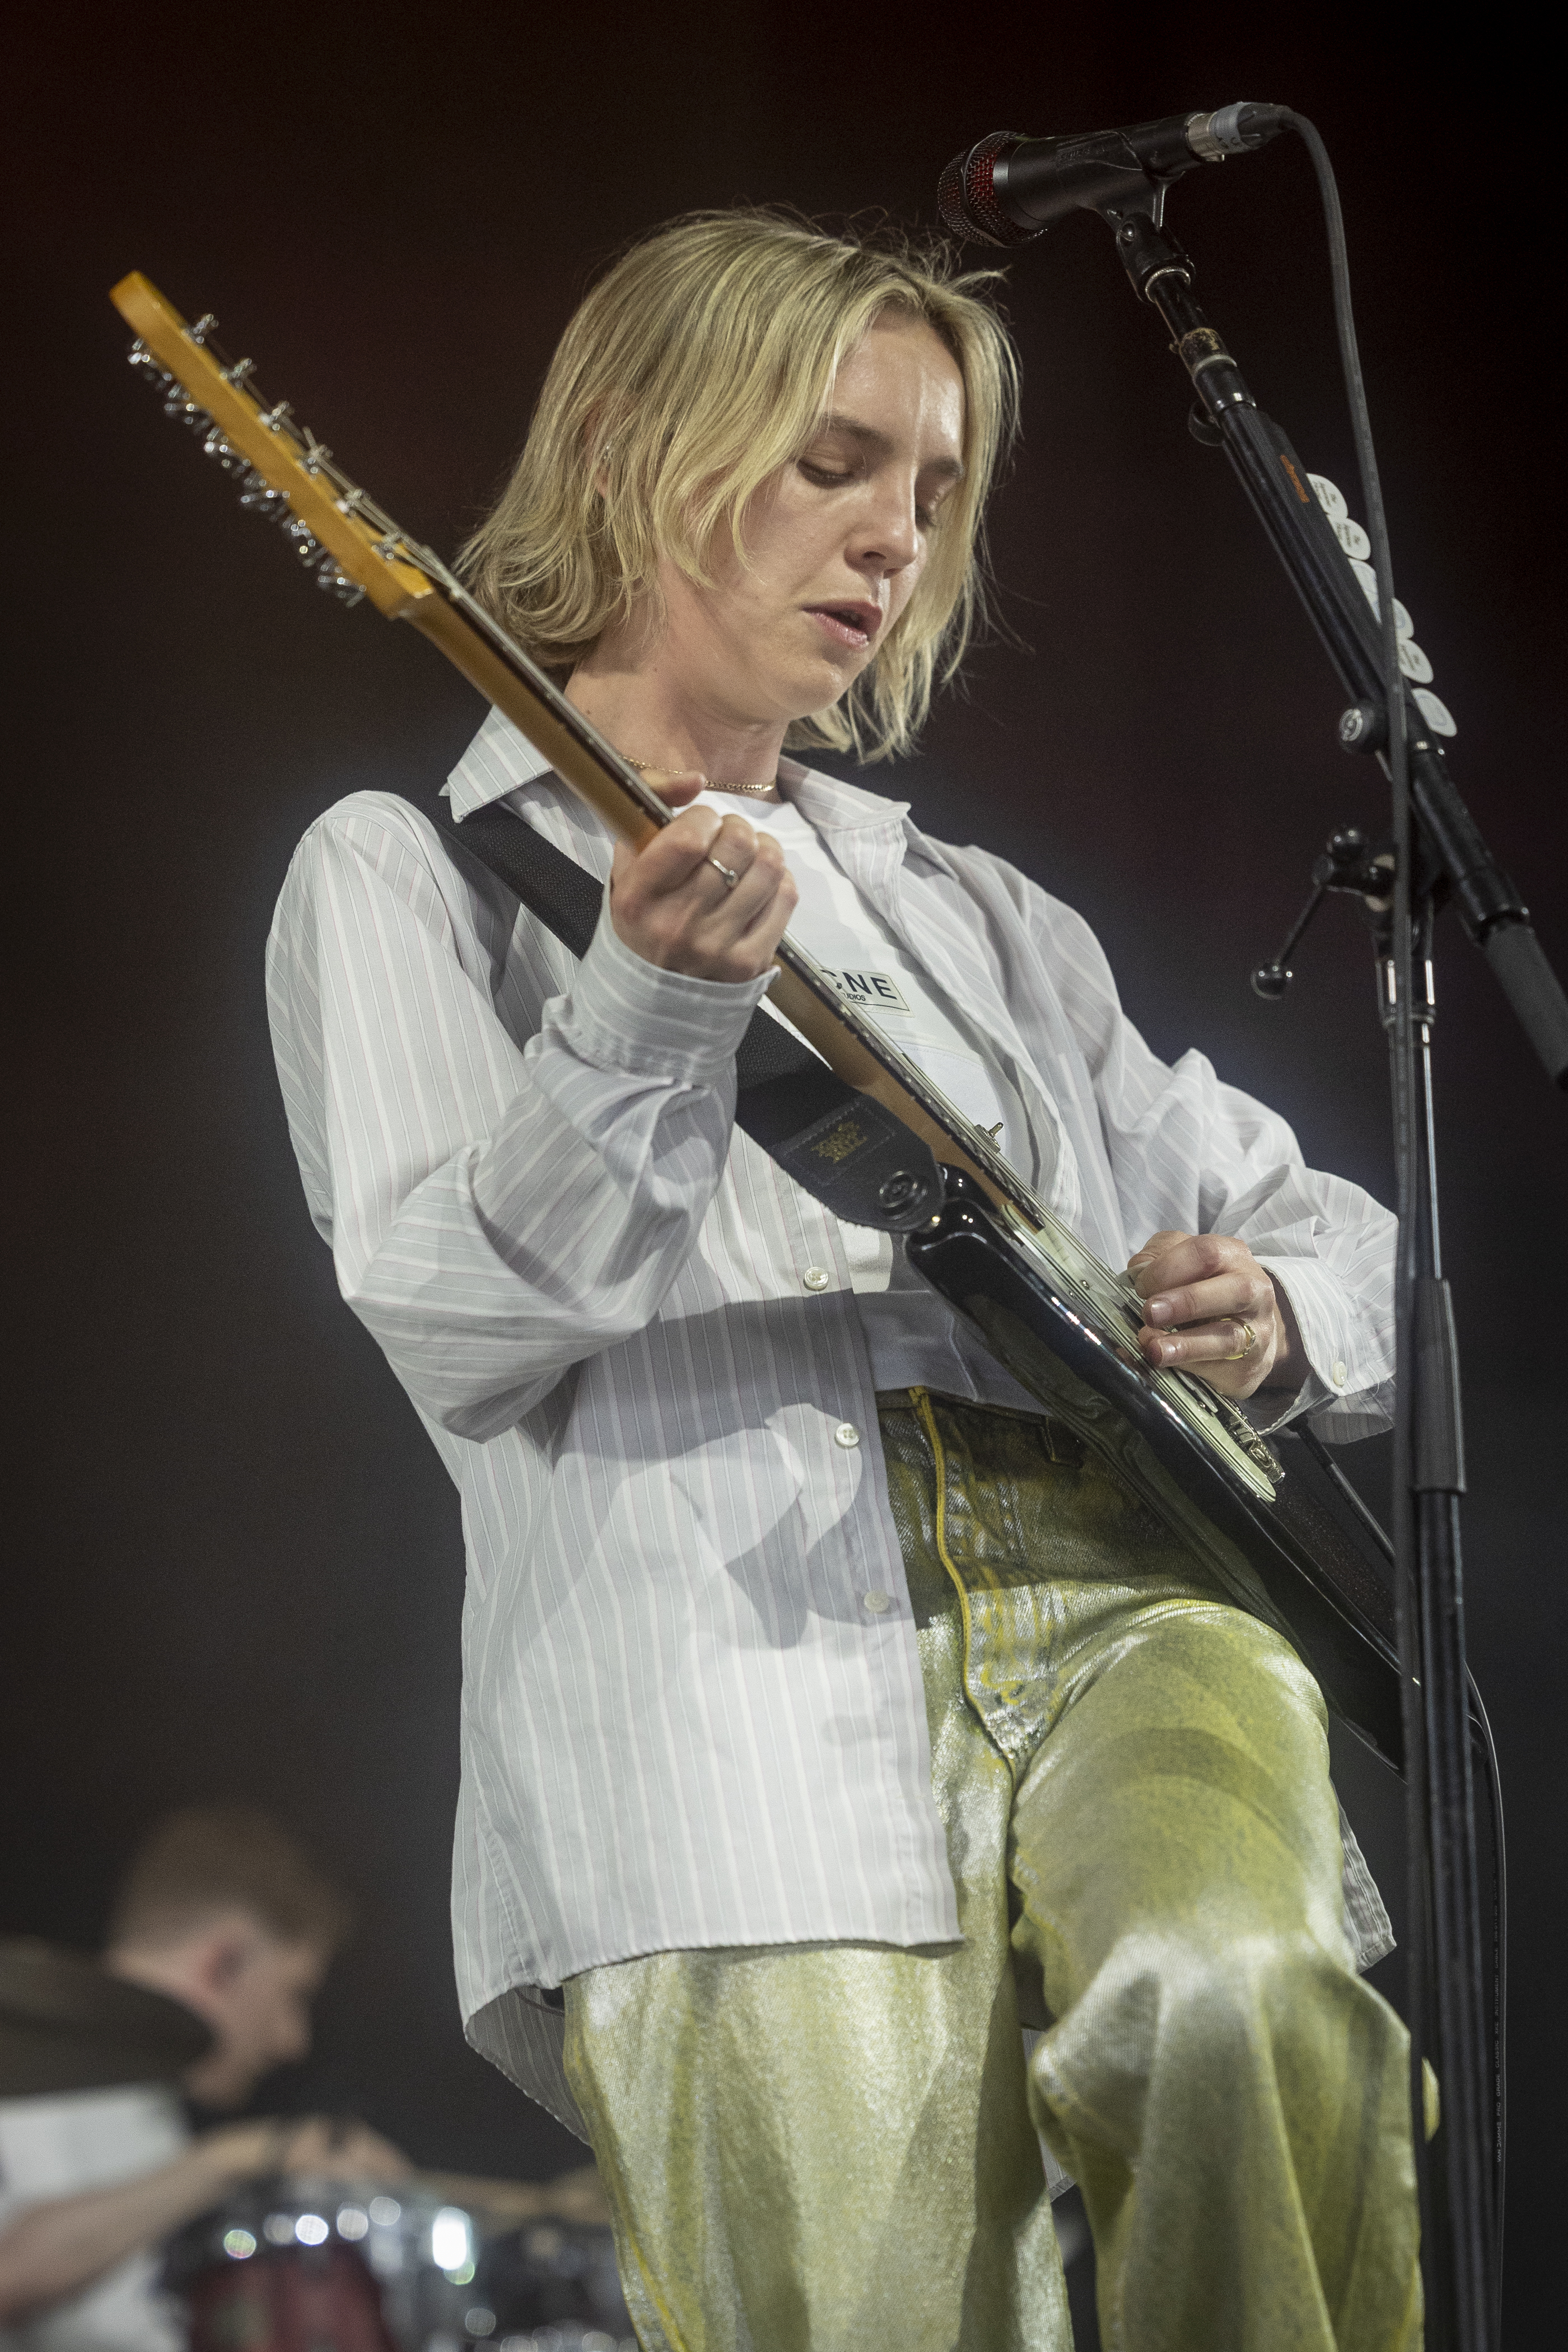 Person playing guitar onstage wearing a striped shirt and metallic trousers